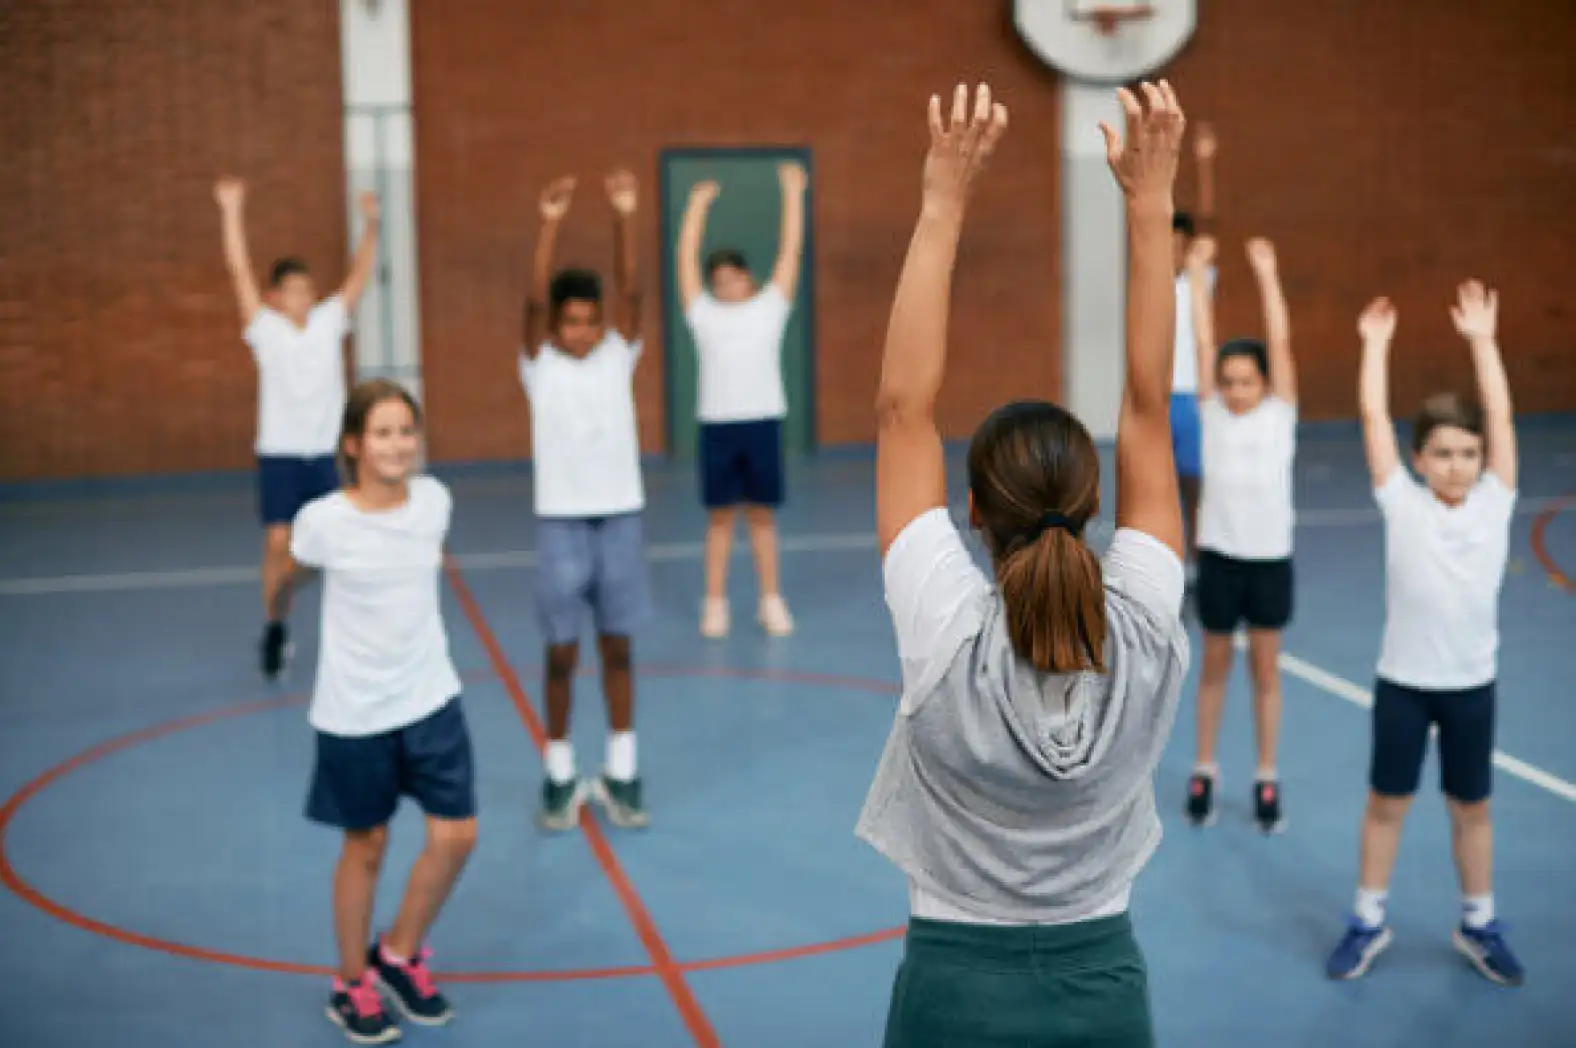 A gym teacher stands in front of her students and they all stretch with their arms over their heads